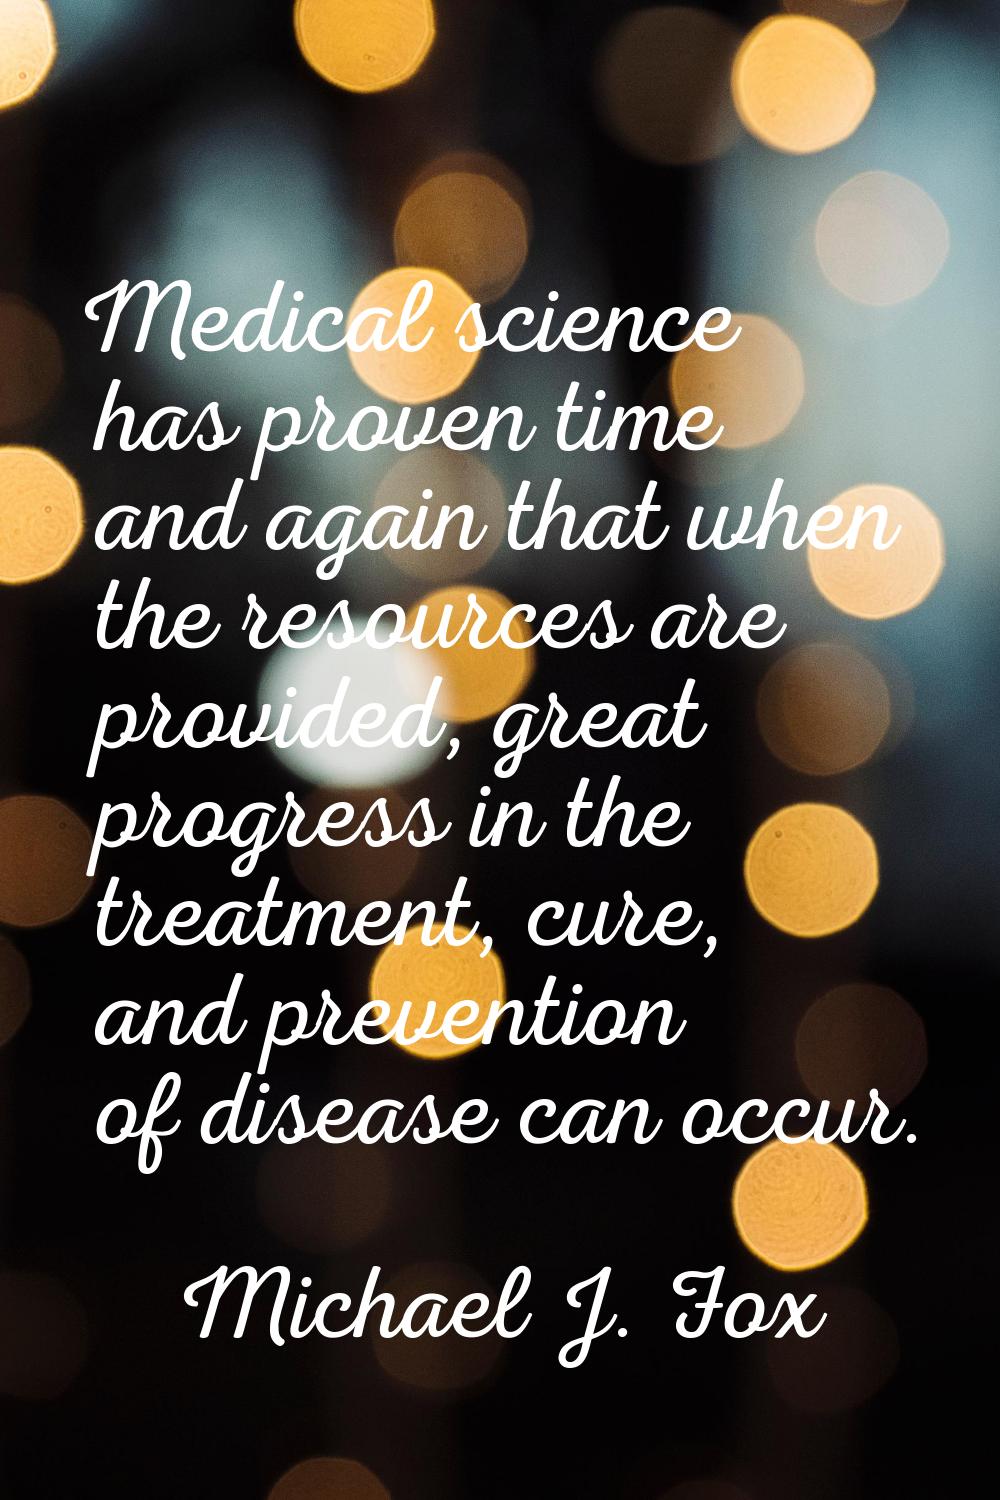 Medical science has proven time and again that when the resources are provided, great progress in t